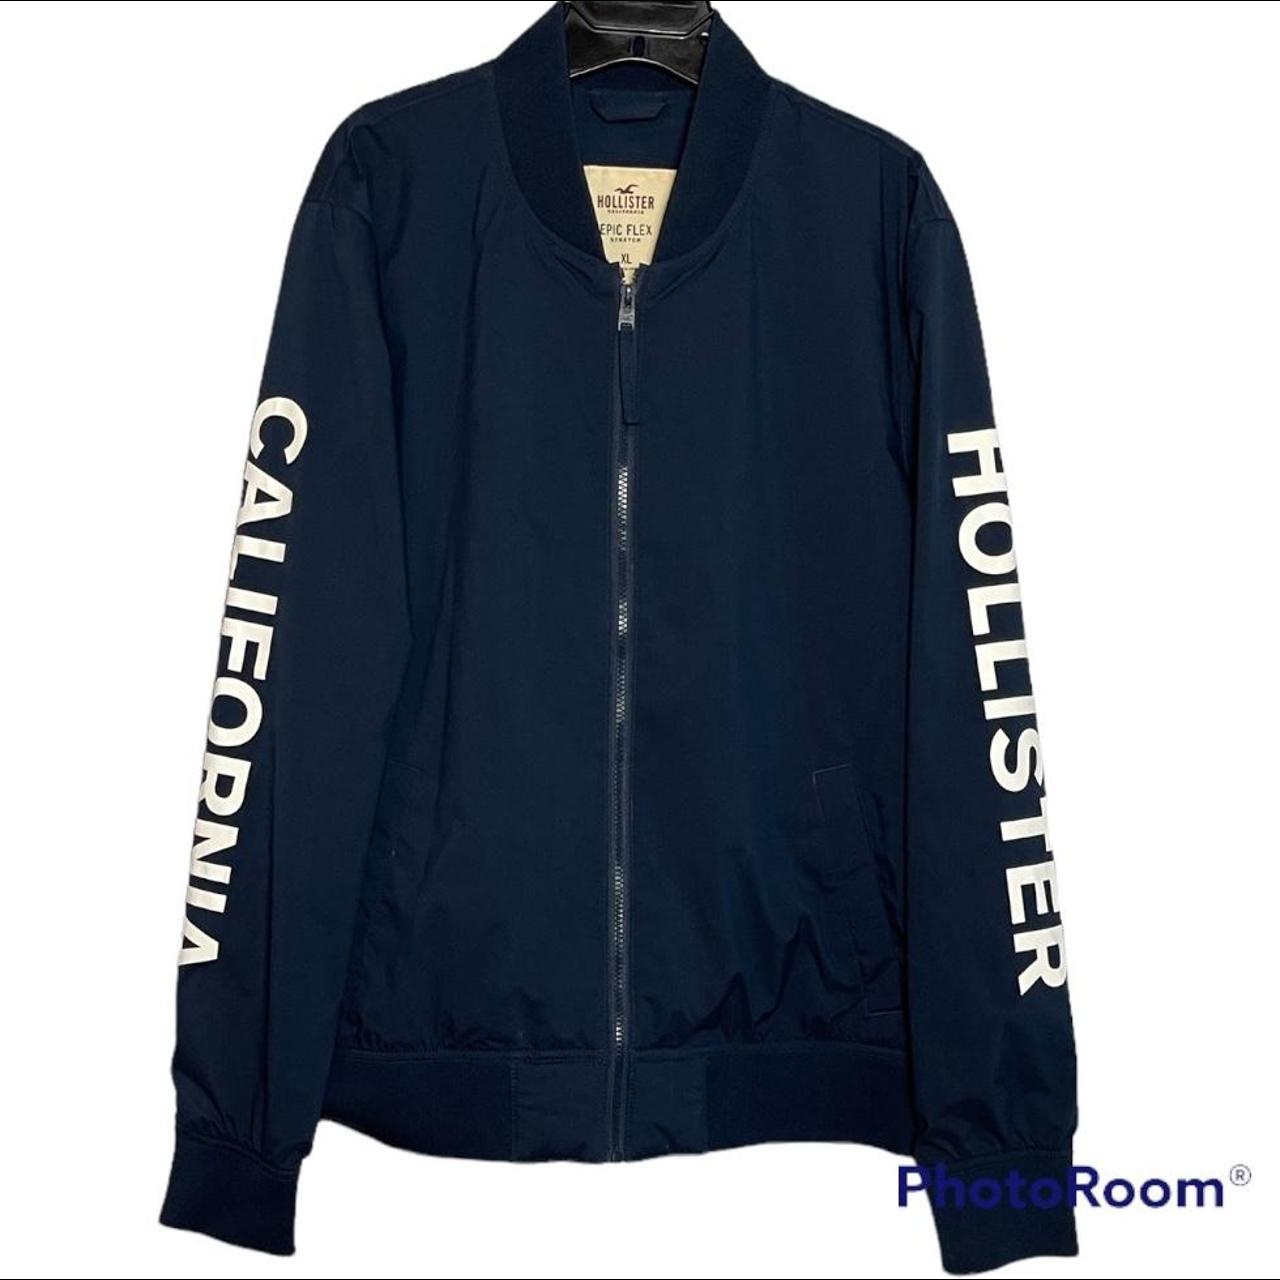 Mens hollister parka all weather down fill feather - Depop